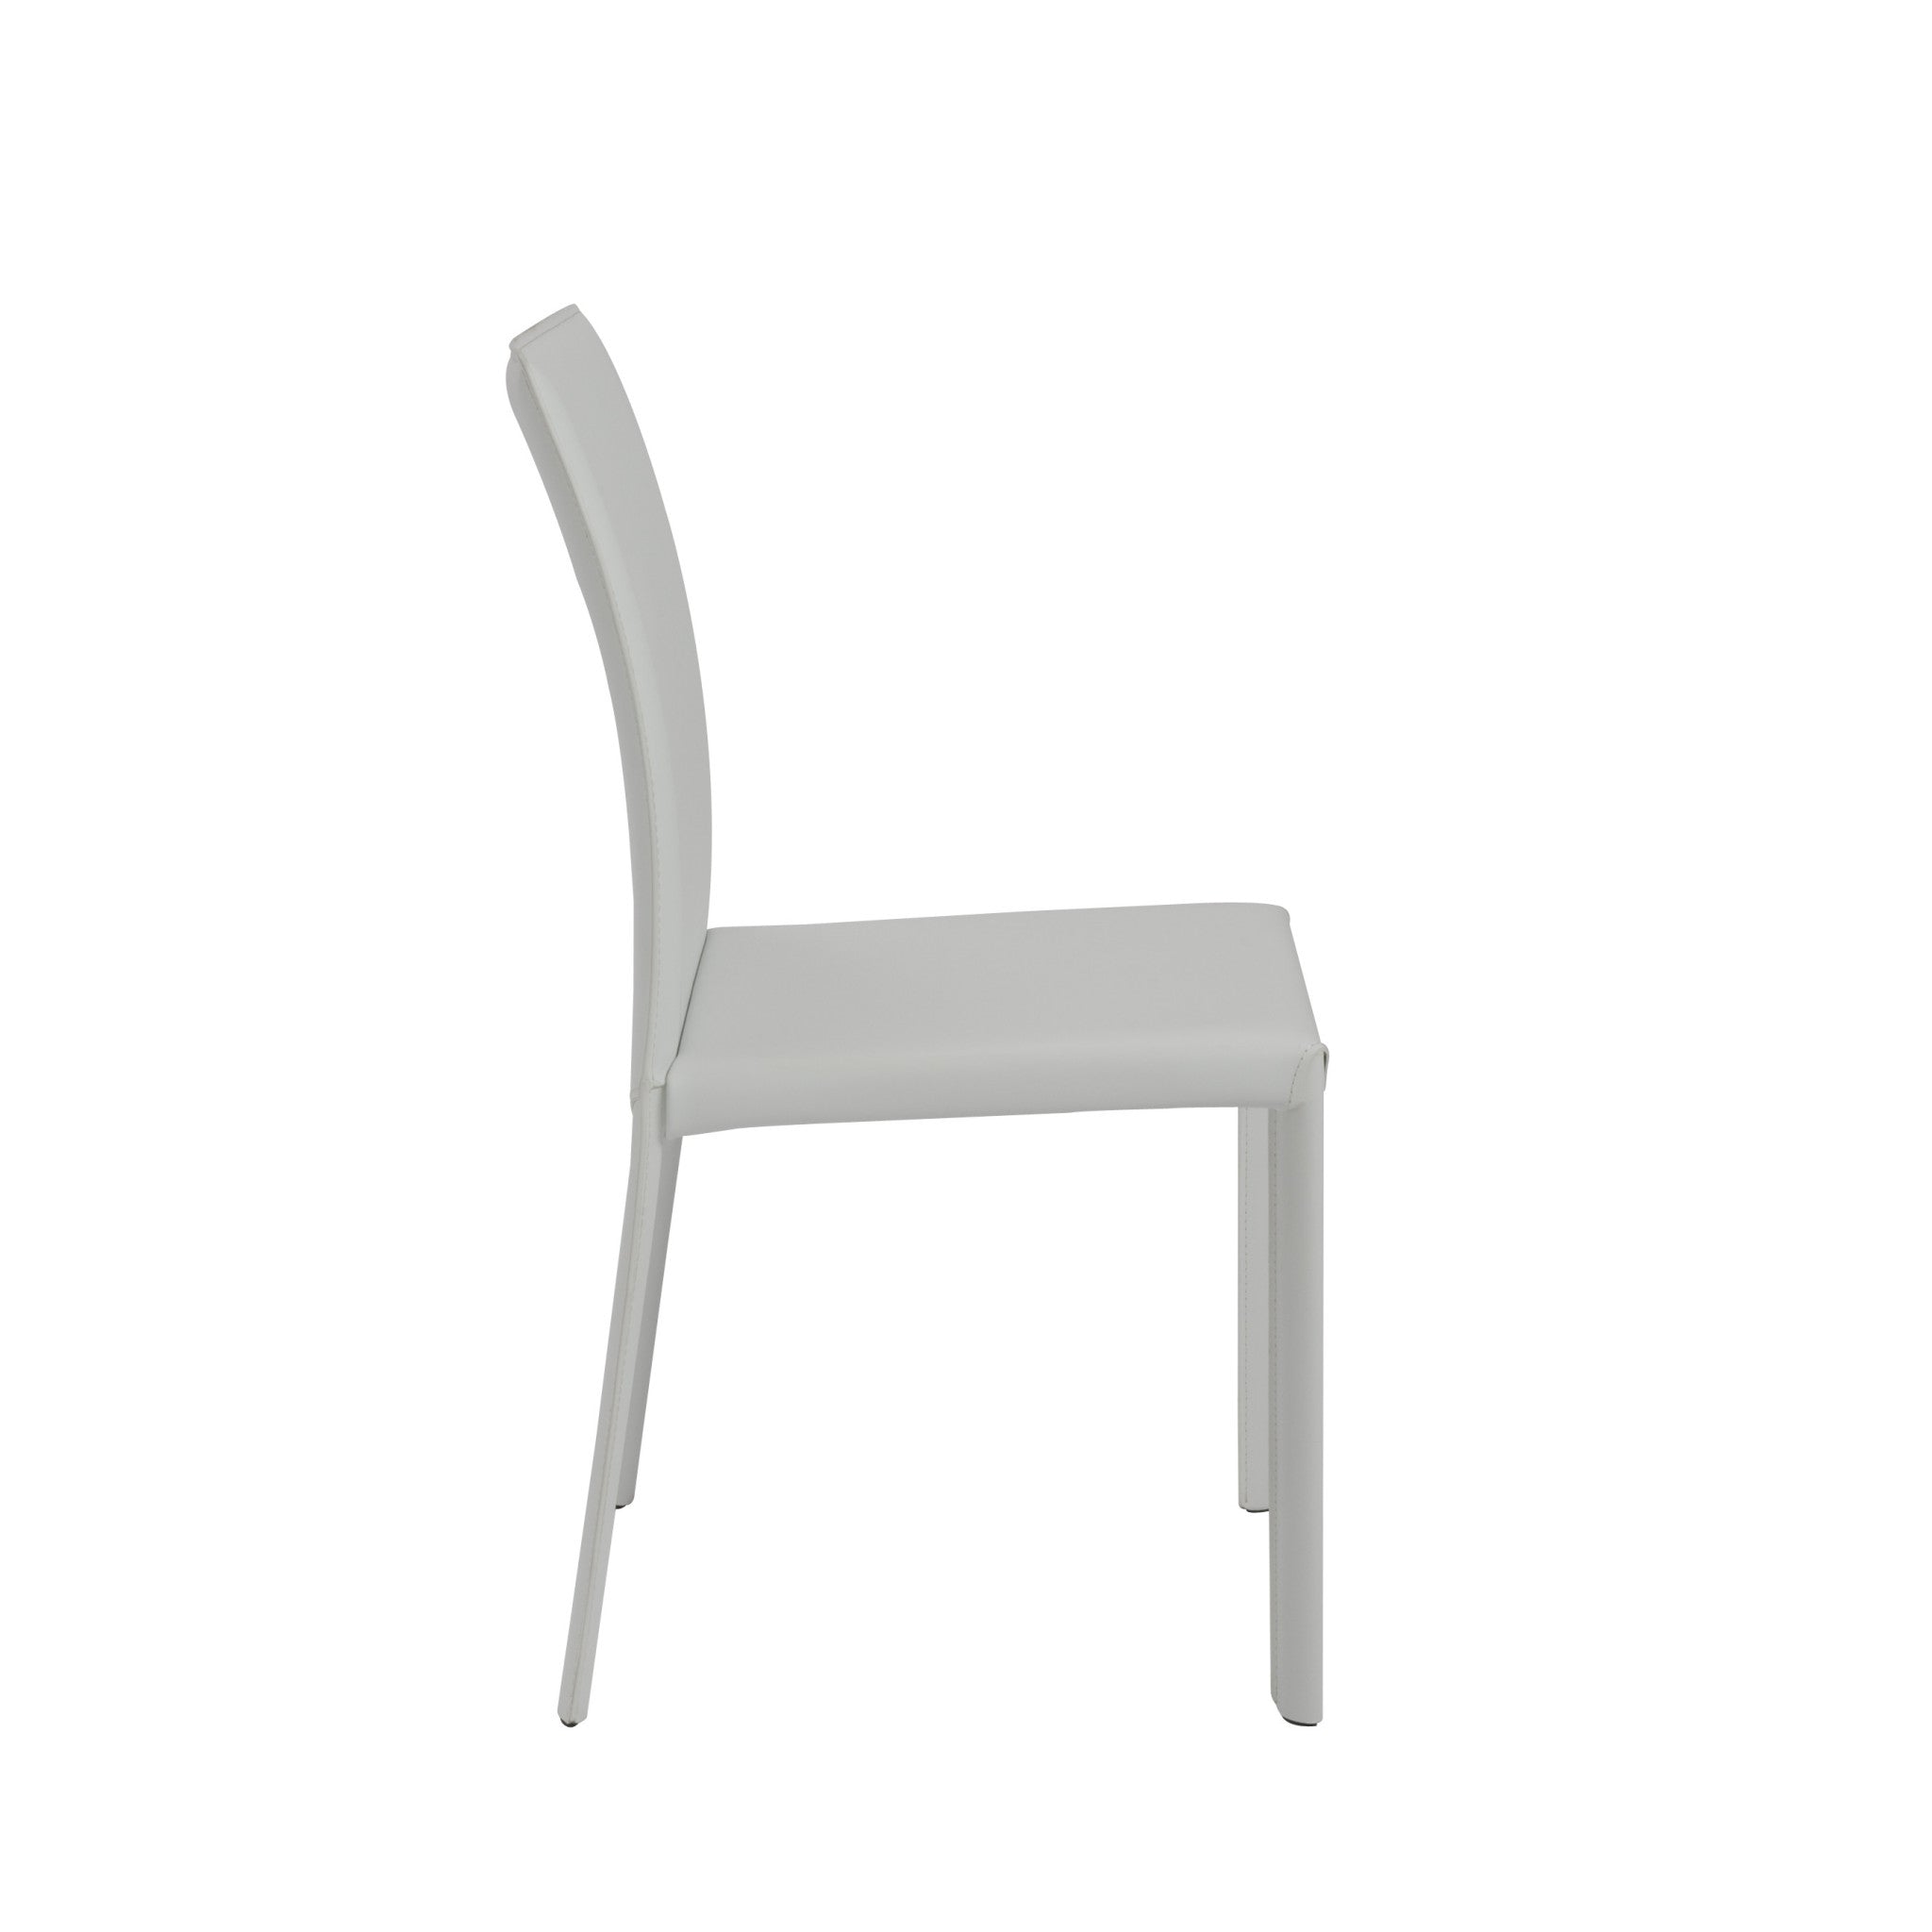 Set of Two White Upholstered Leather Dining Side Chairs